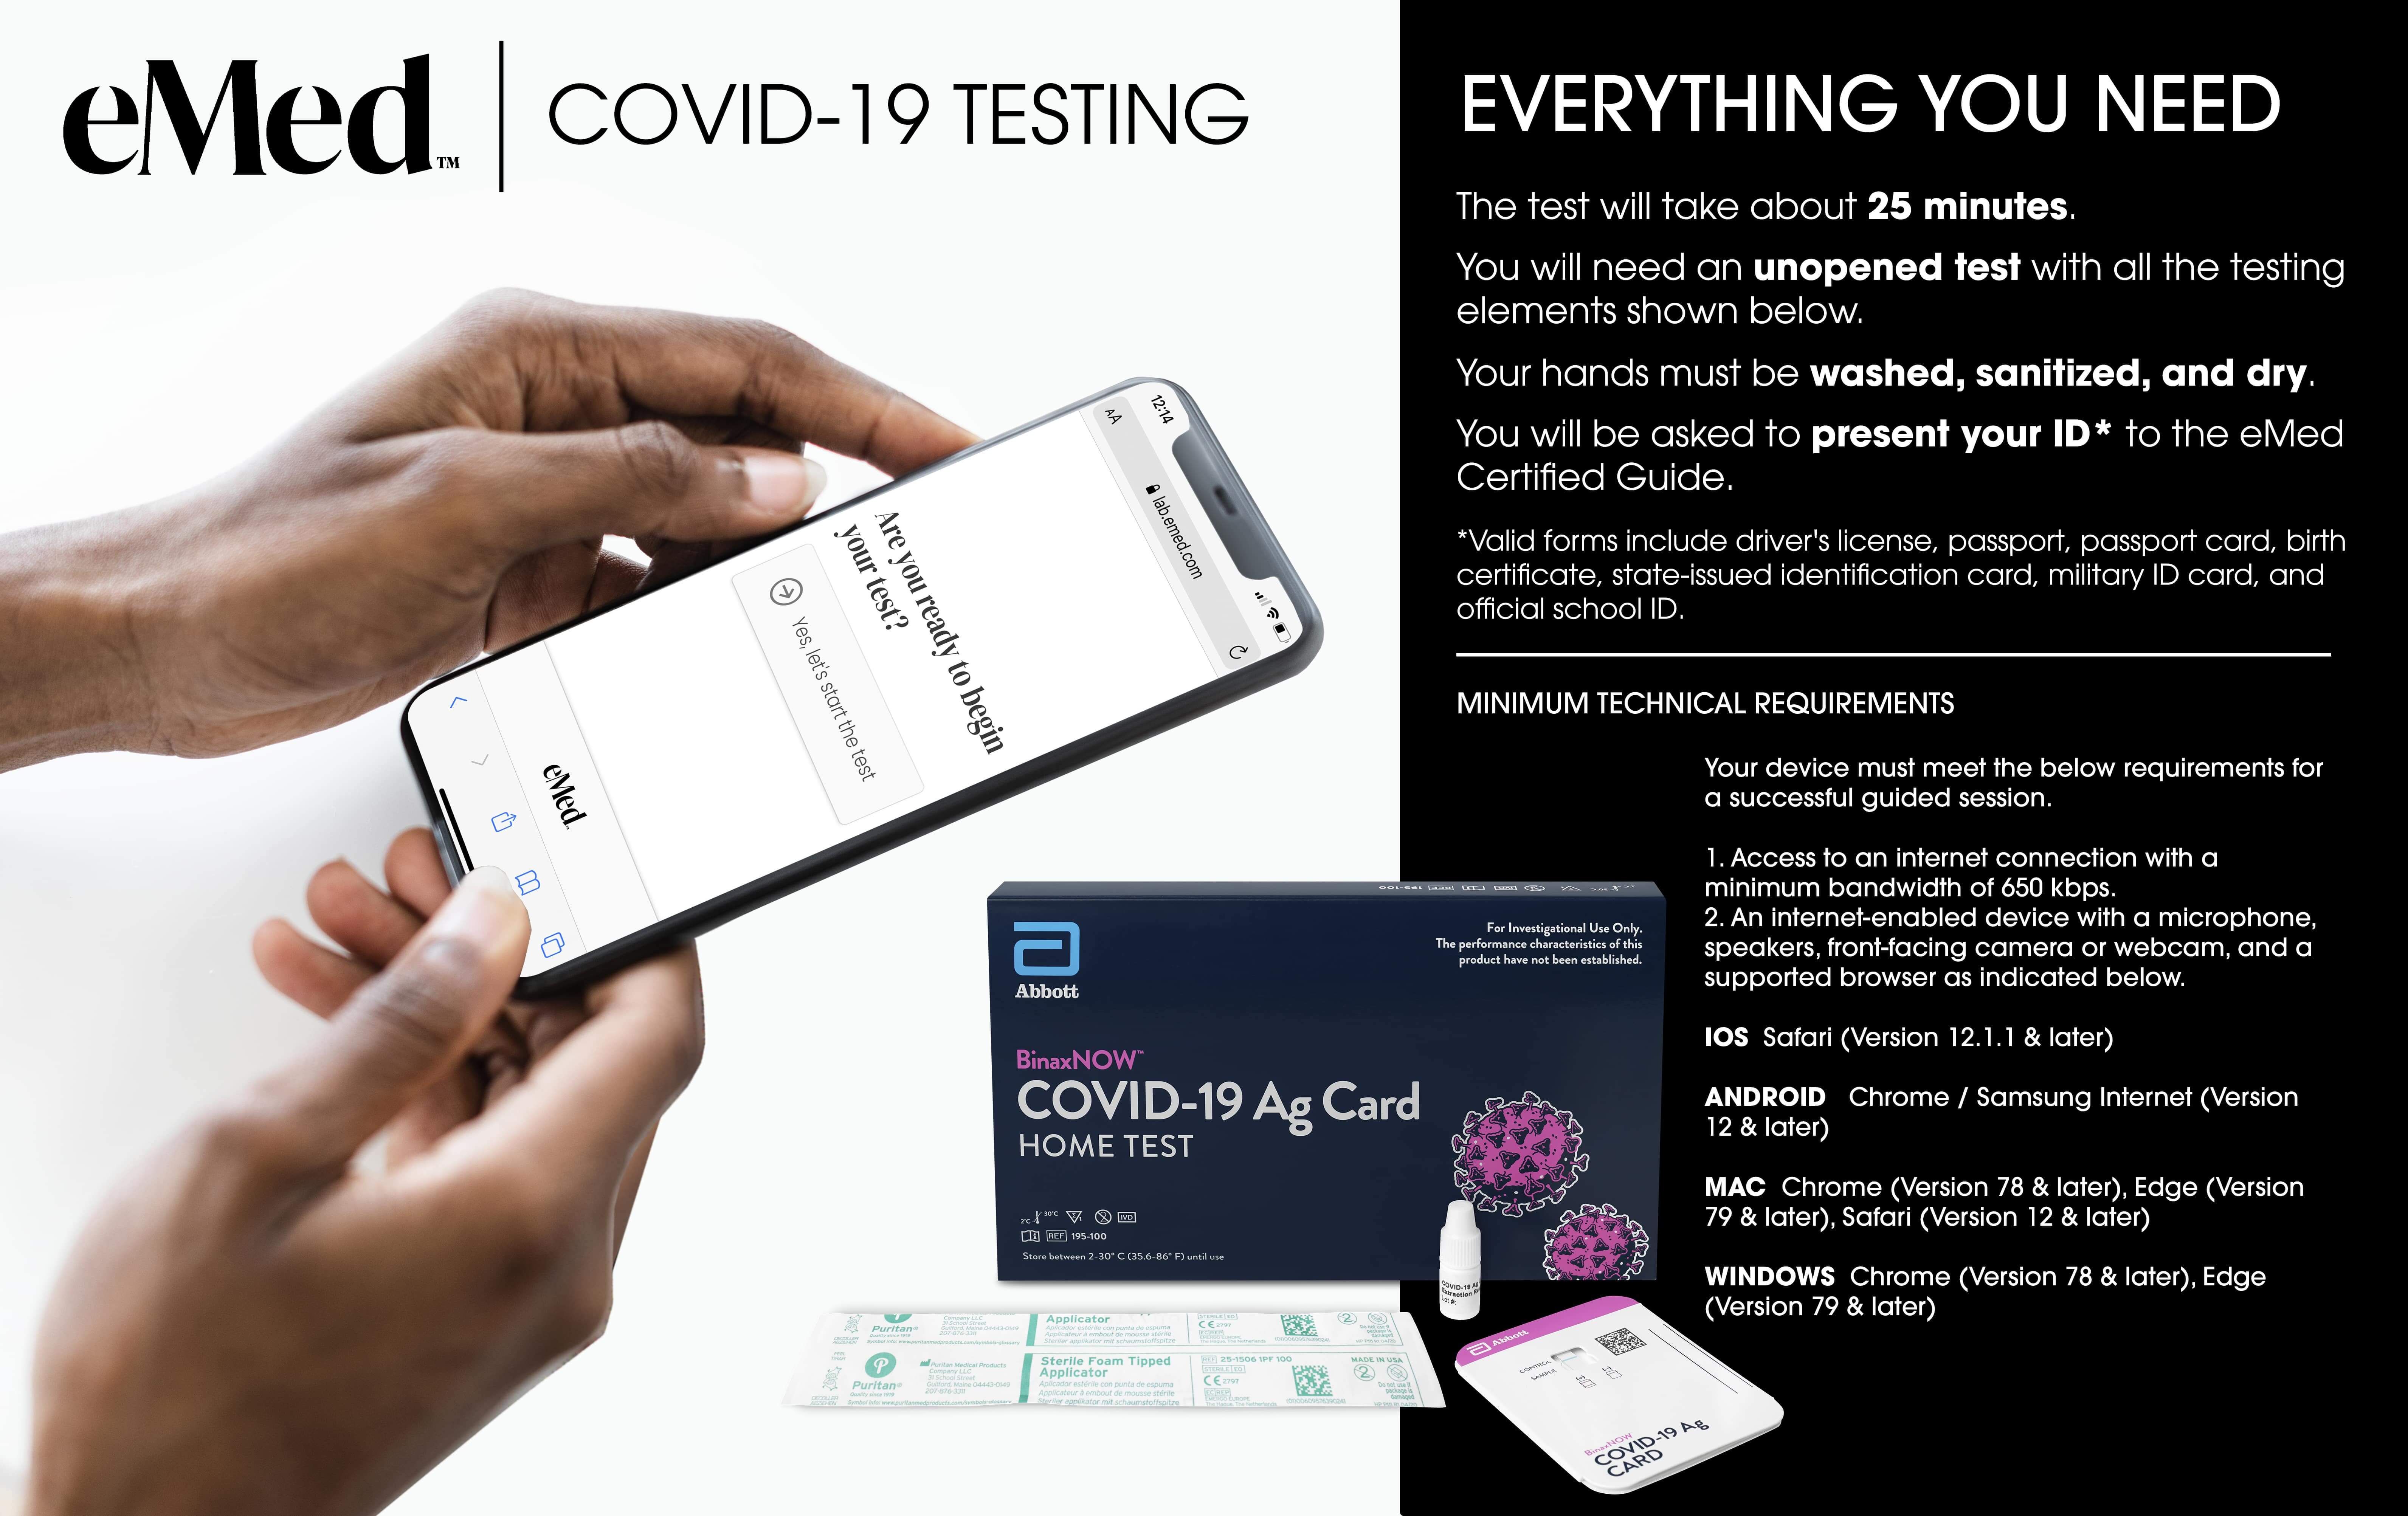 Abbott BinaxNOW™ COVID-19 Ag Card Home Test with eMed Telehealth Services for Travel - 2 Pack